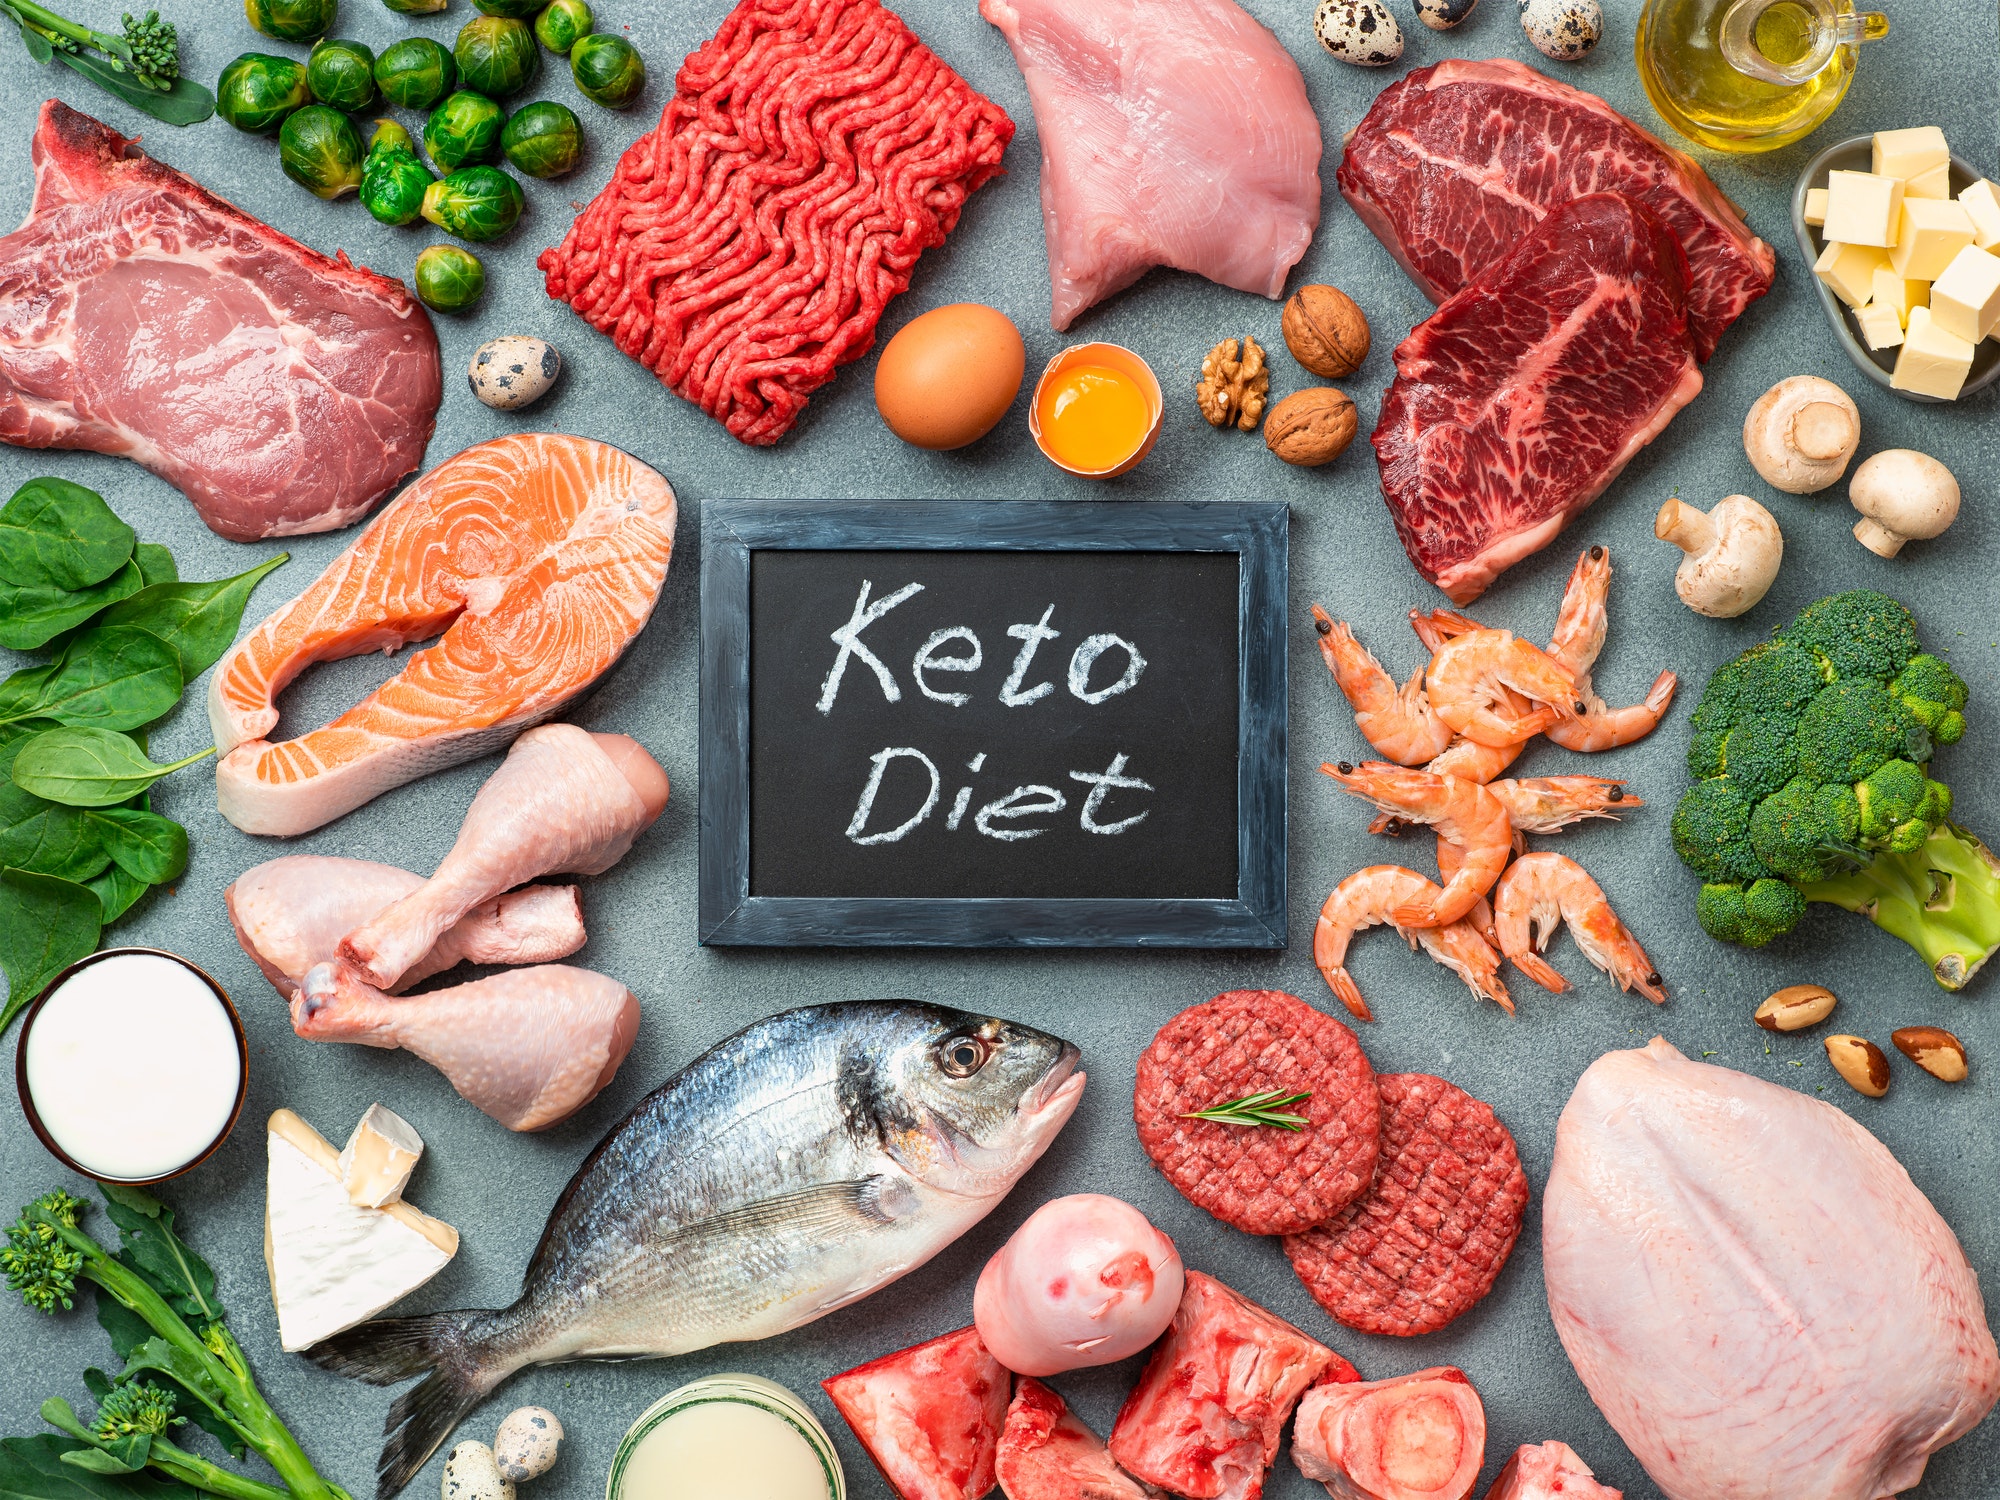 Keto Diet: What is Ketogenic Diet? - Public Health Notes